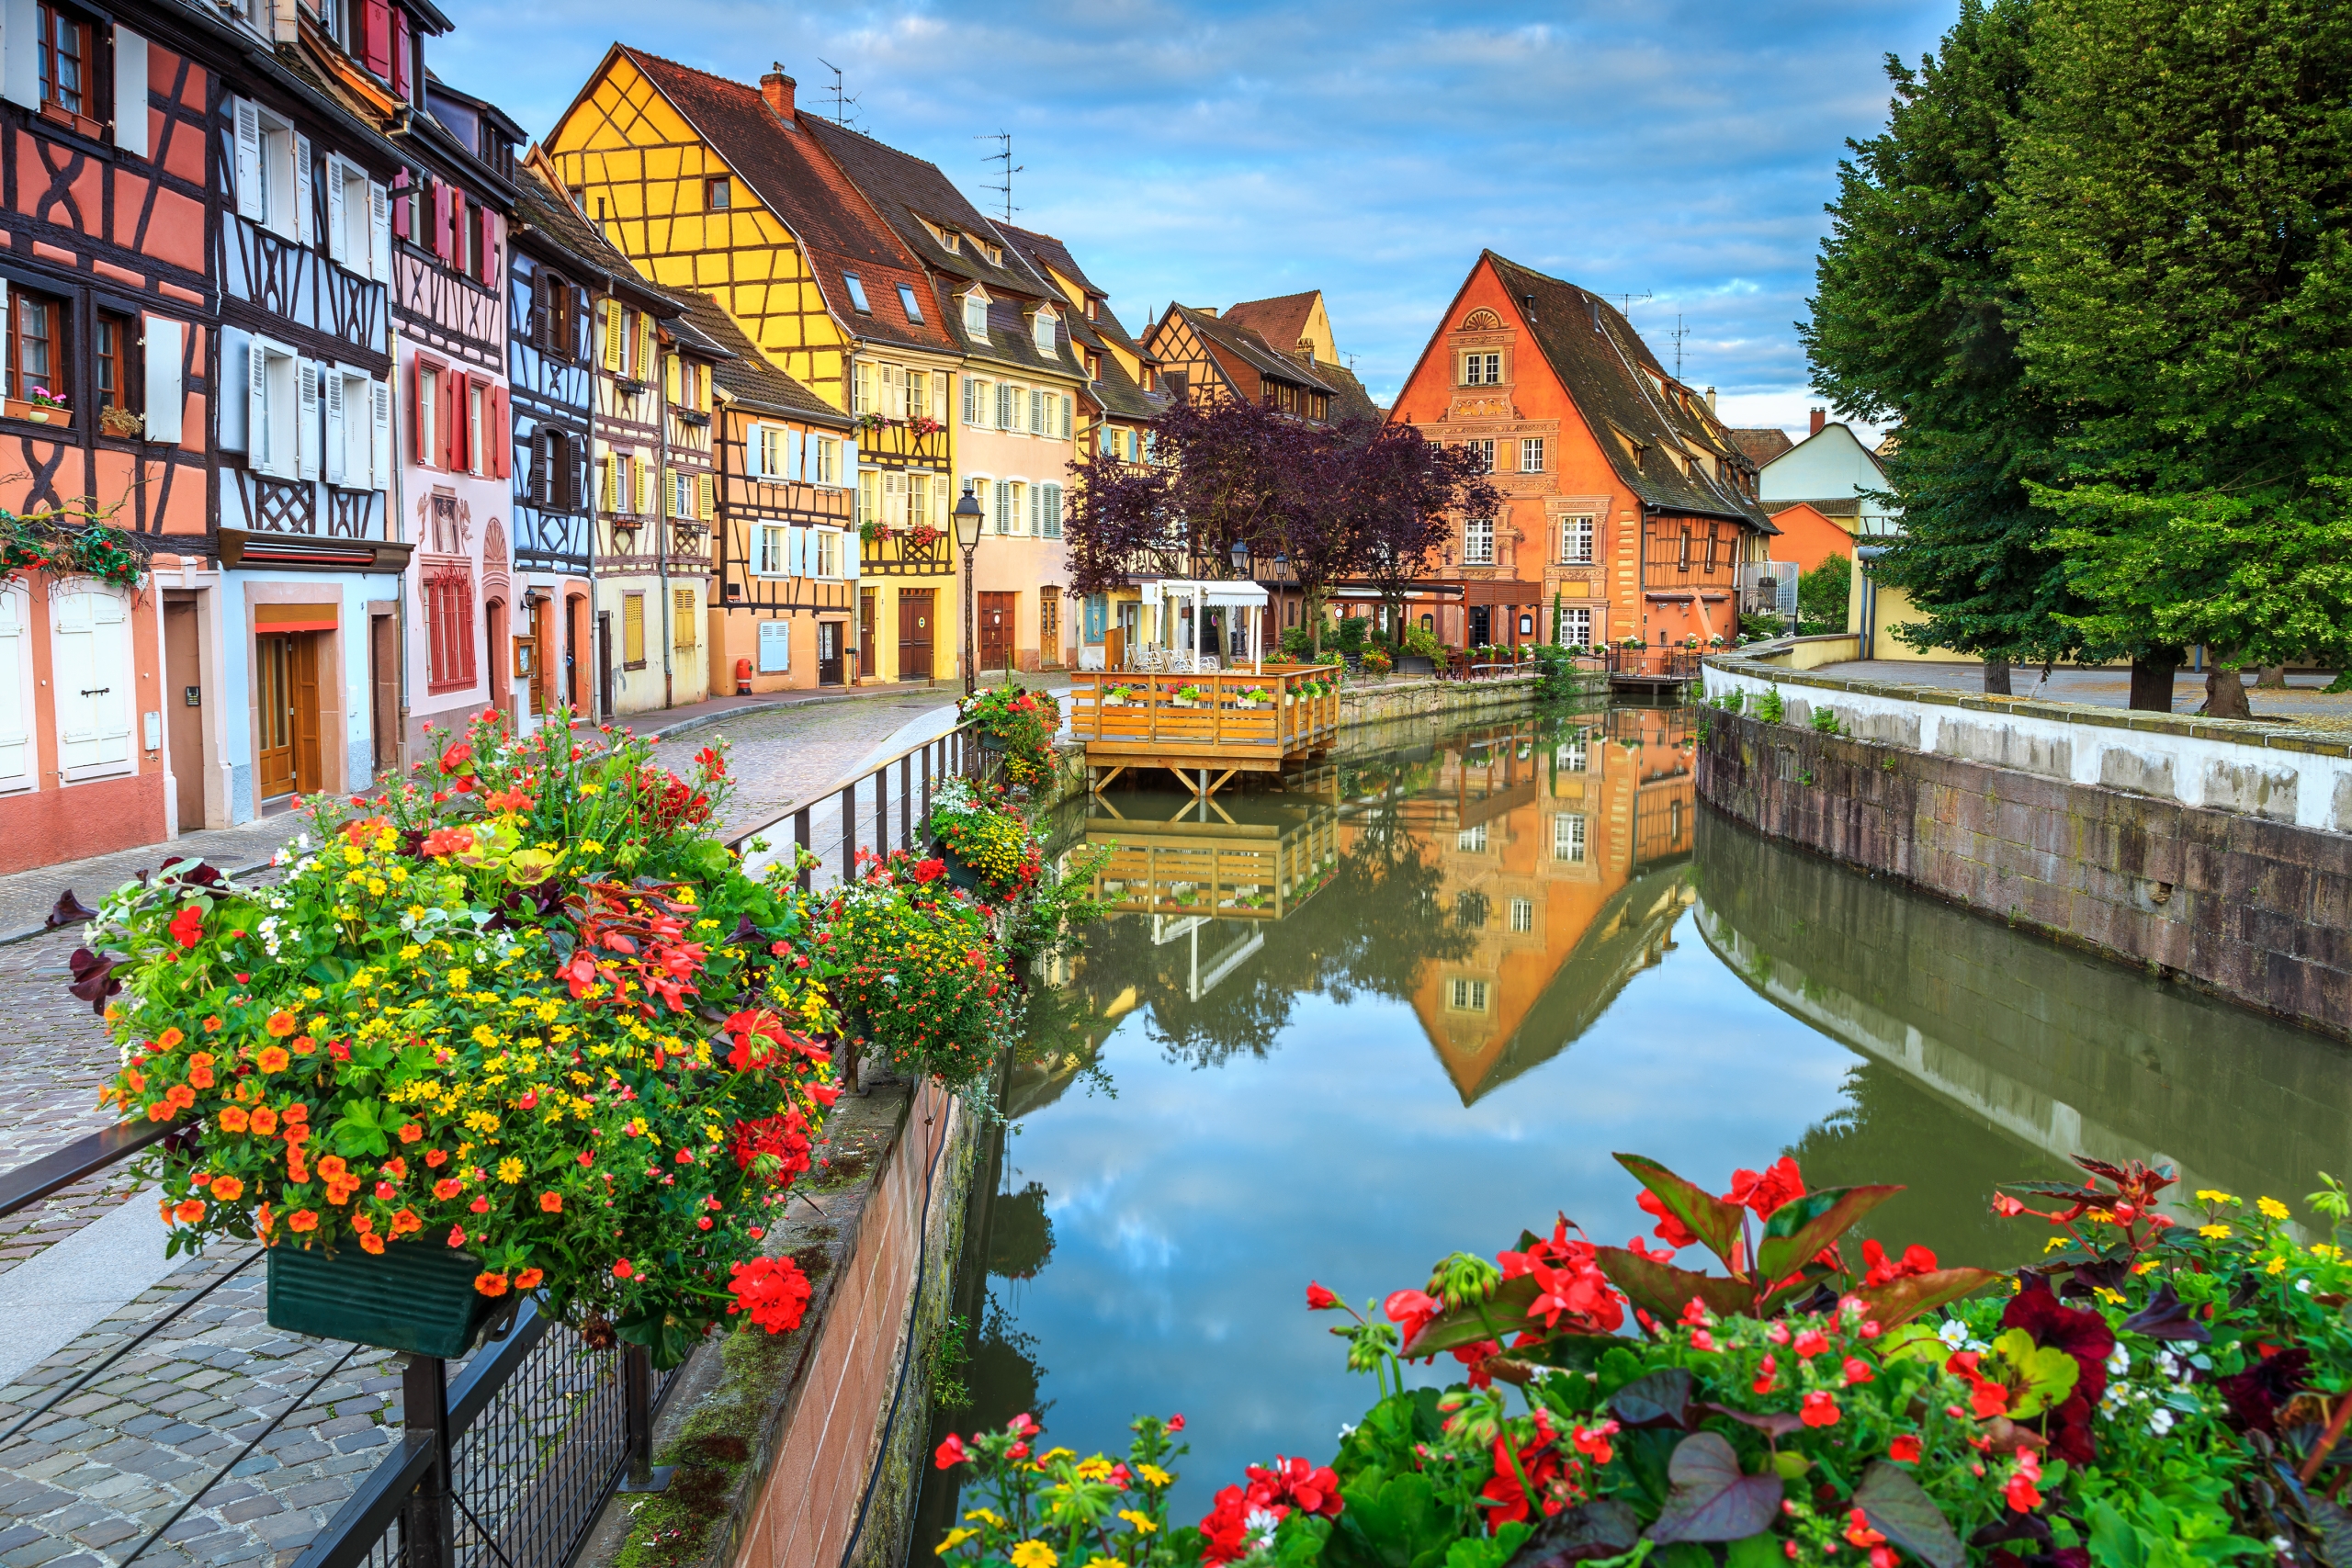 Switzerland, Germany & France: The Black Forest & the Alsace Wine Route
